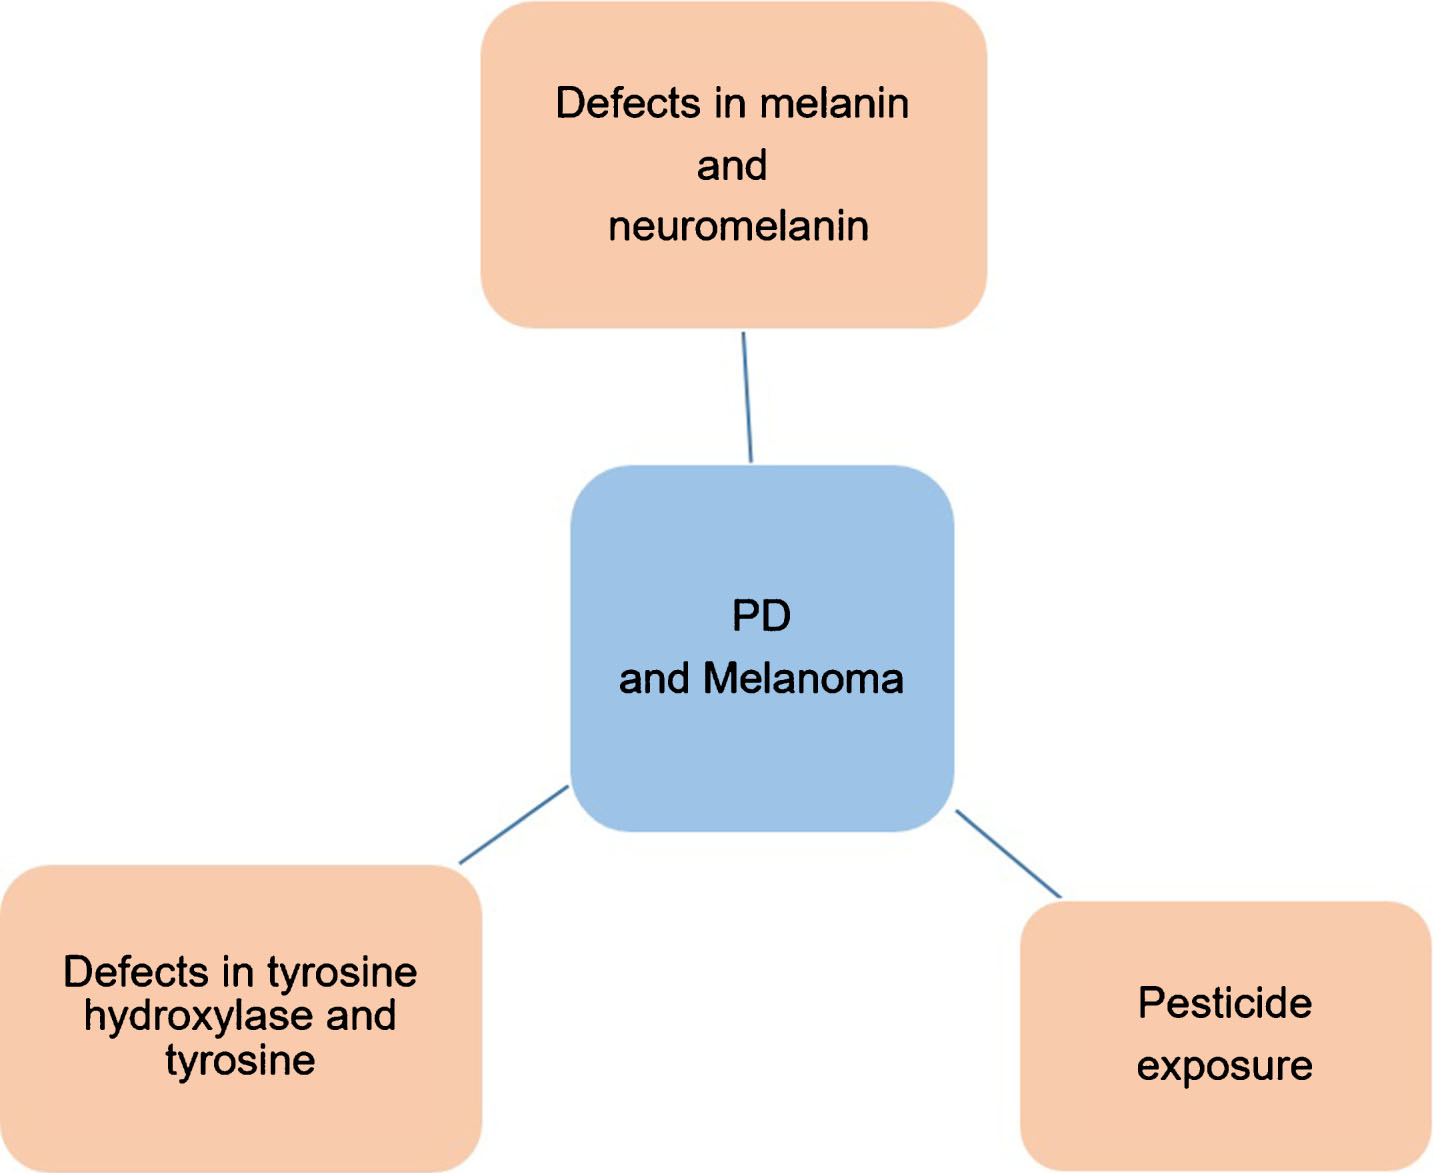 Schematic representation of possible mechanisms that can explain the co-occurrence of PD and melanoma.